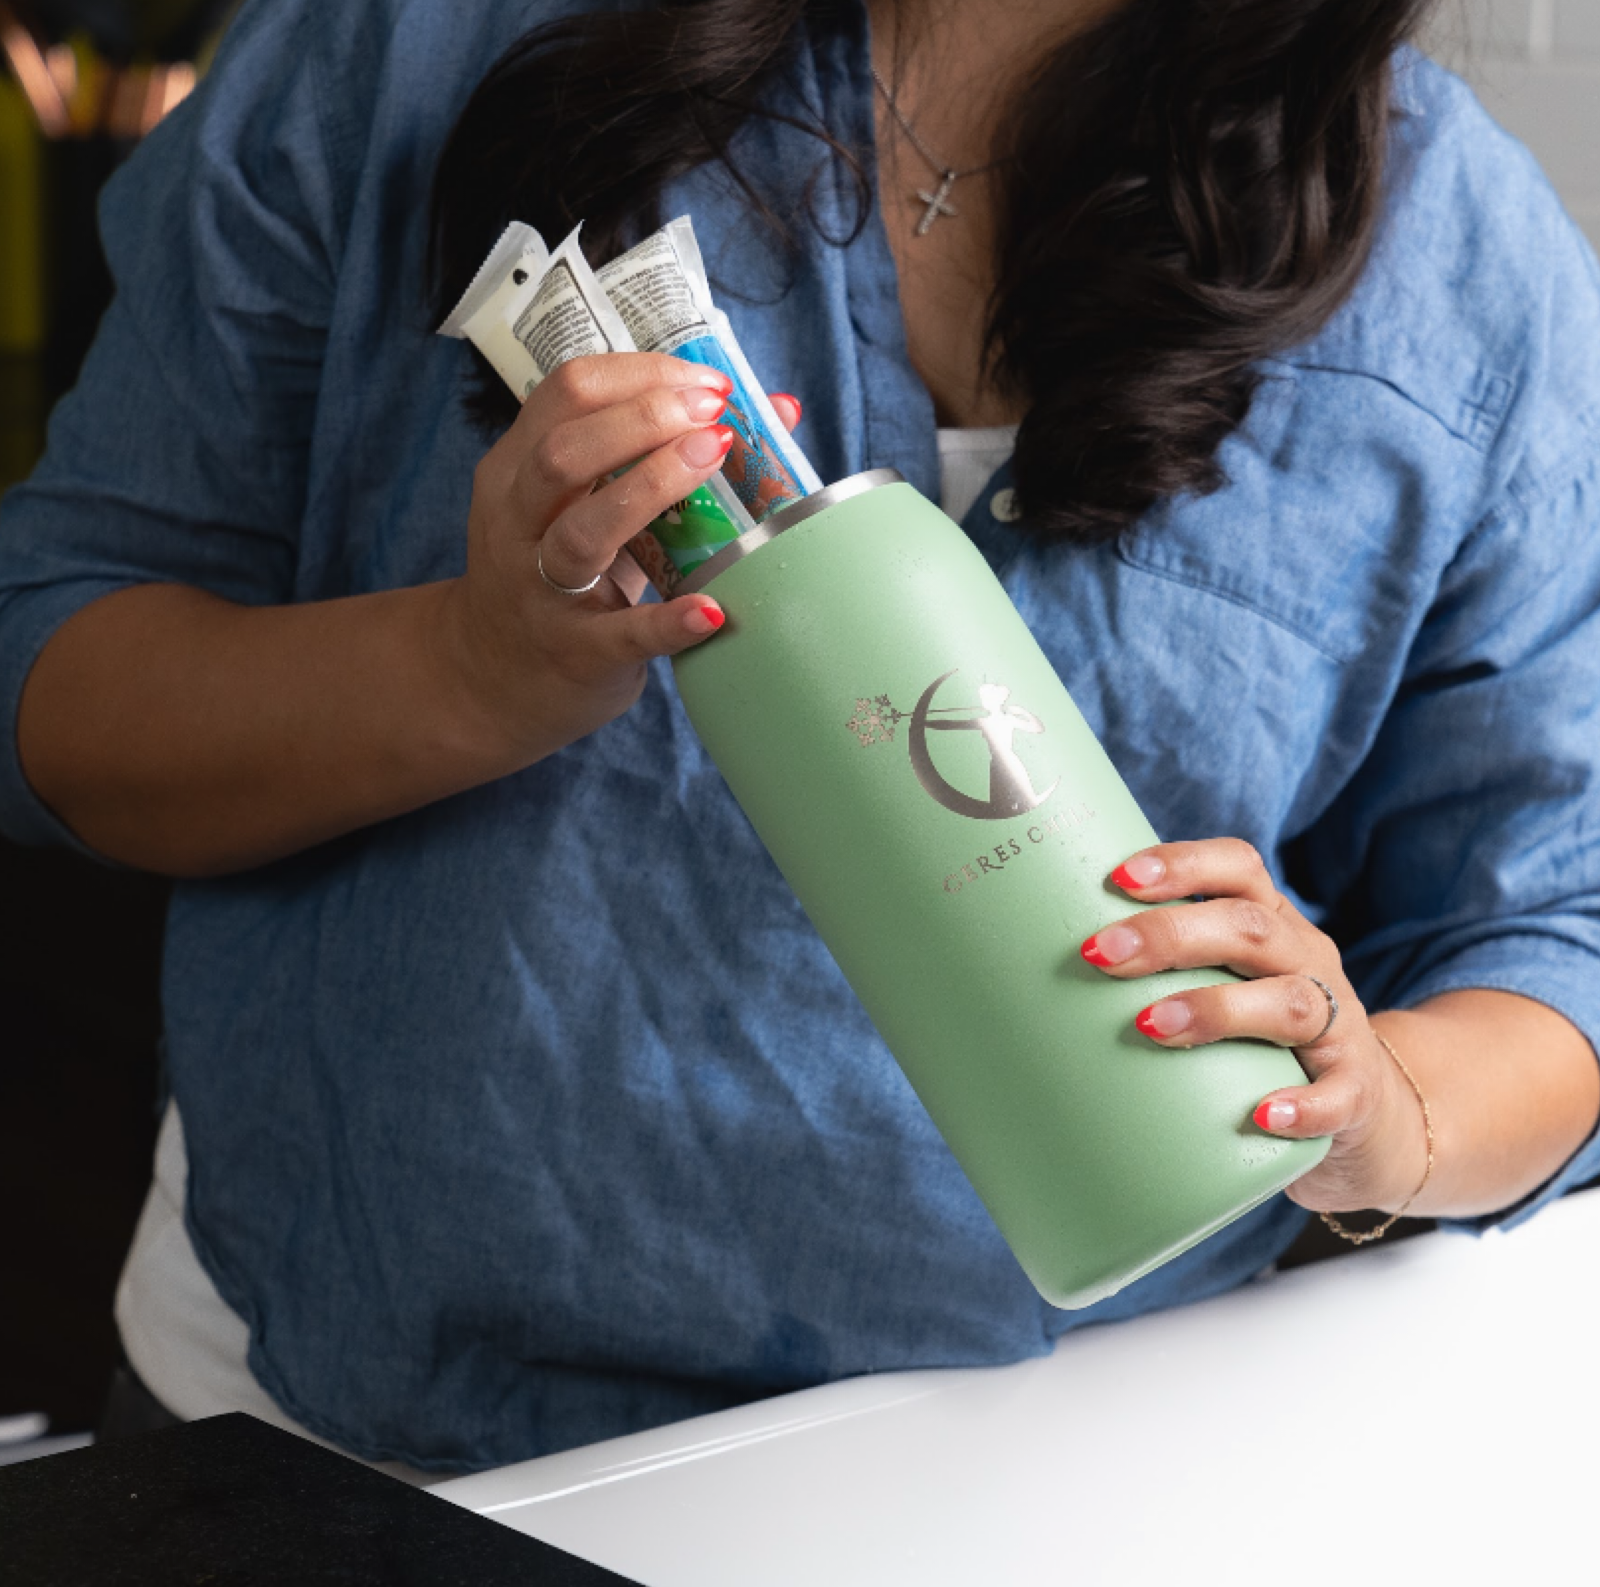 Ceres Chill: The World's First Breastmilk Chiller